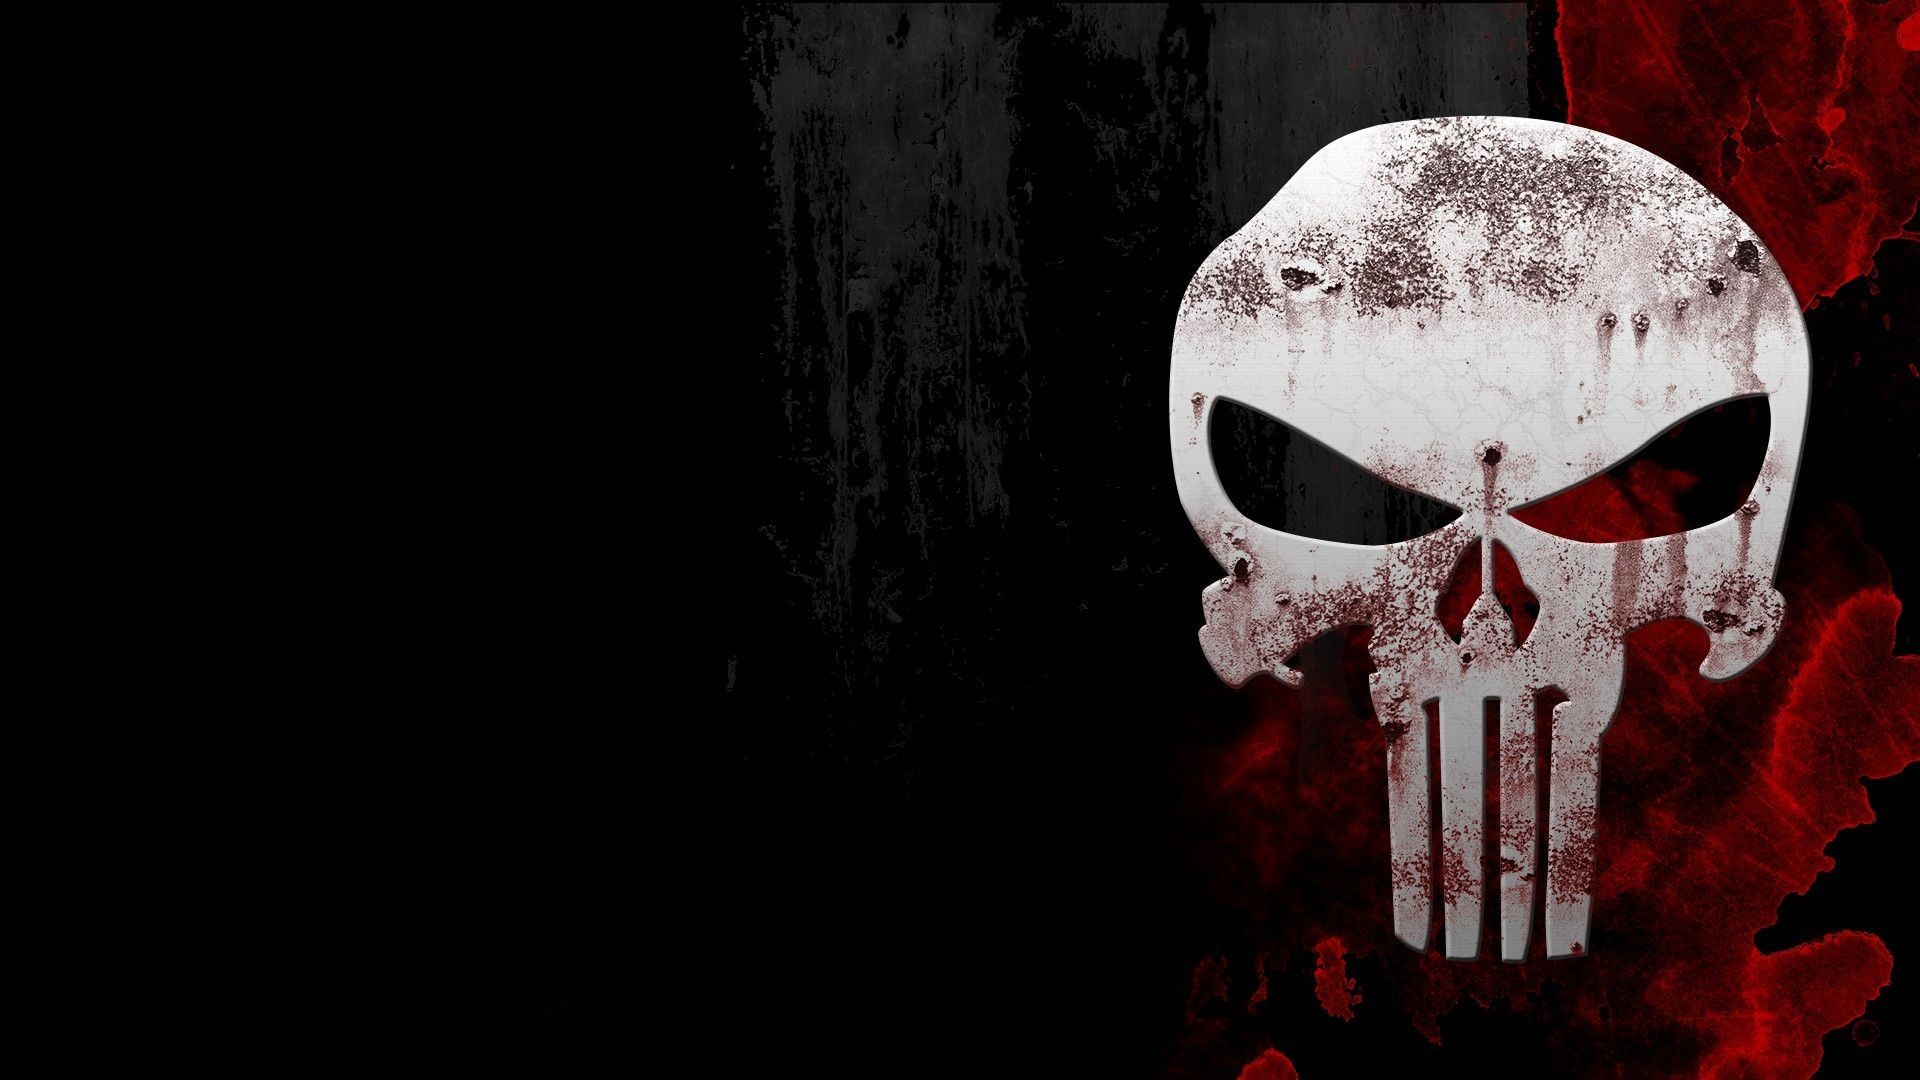 1920x1080 Awesome Skull Phone Wallpapers | HD Wallpapers | Pinterest | Skull wallpaper  and Wallpaper